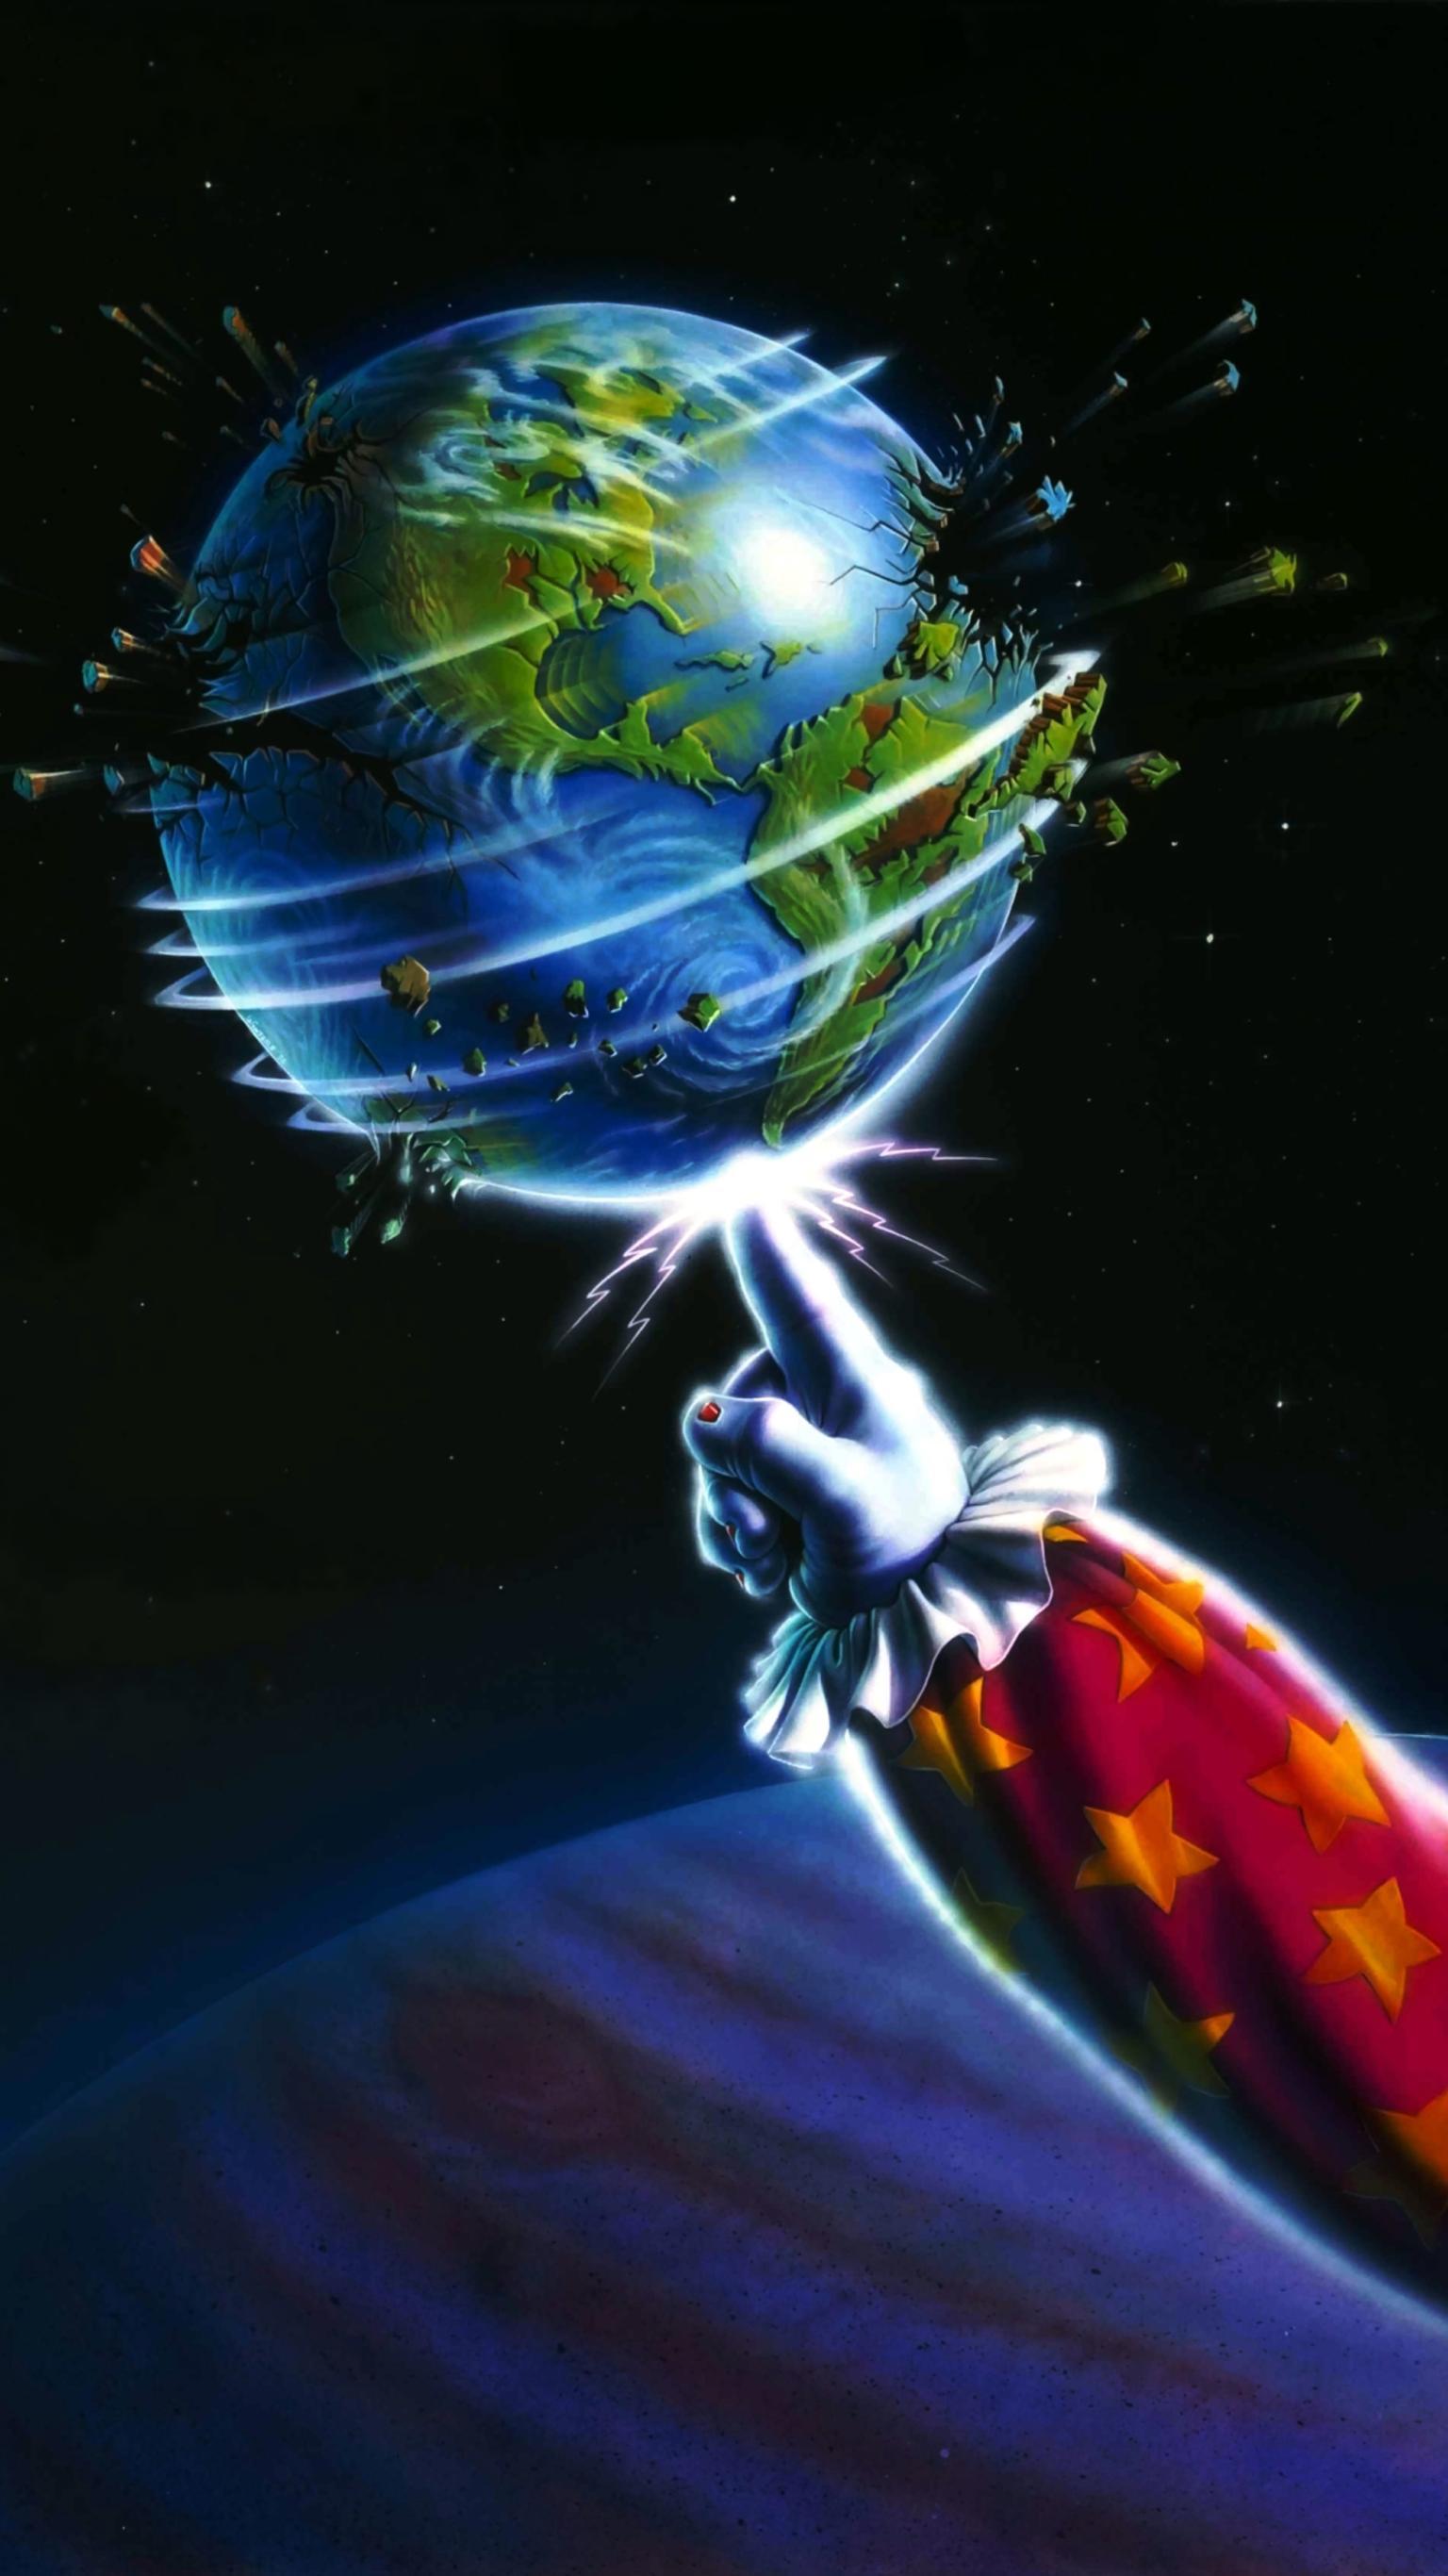 Killer Klowns from Outer Space (1988) Phone Wallpaper